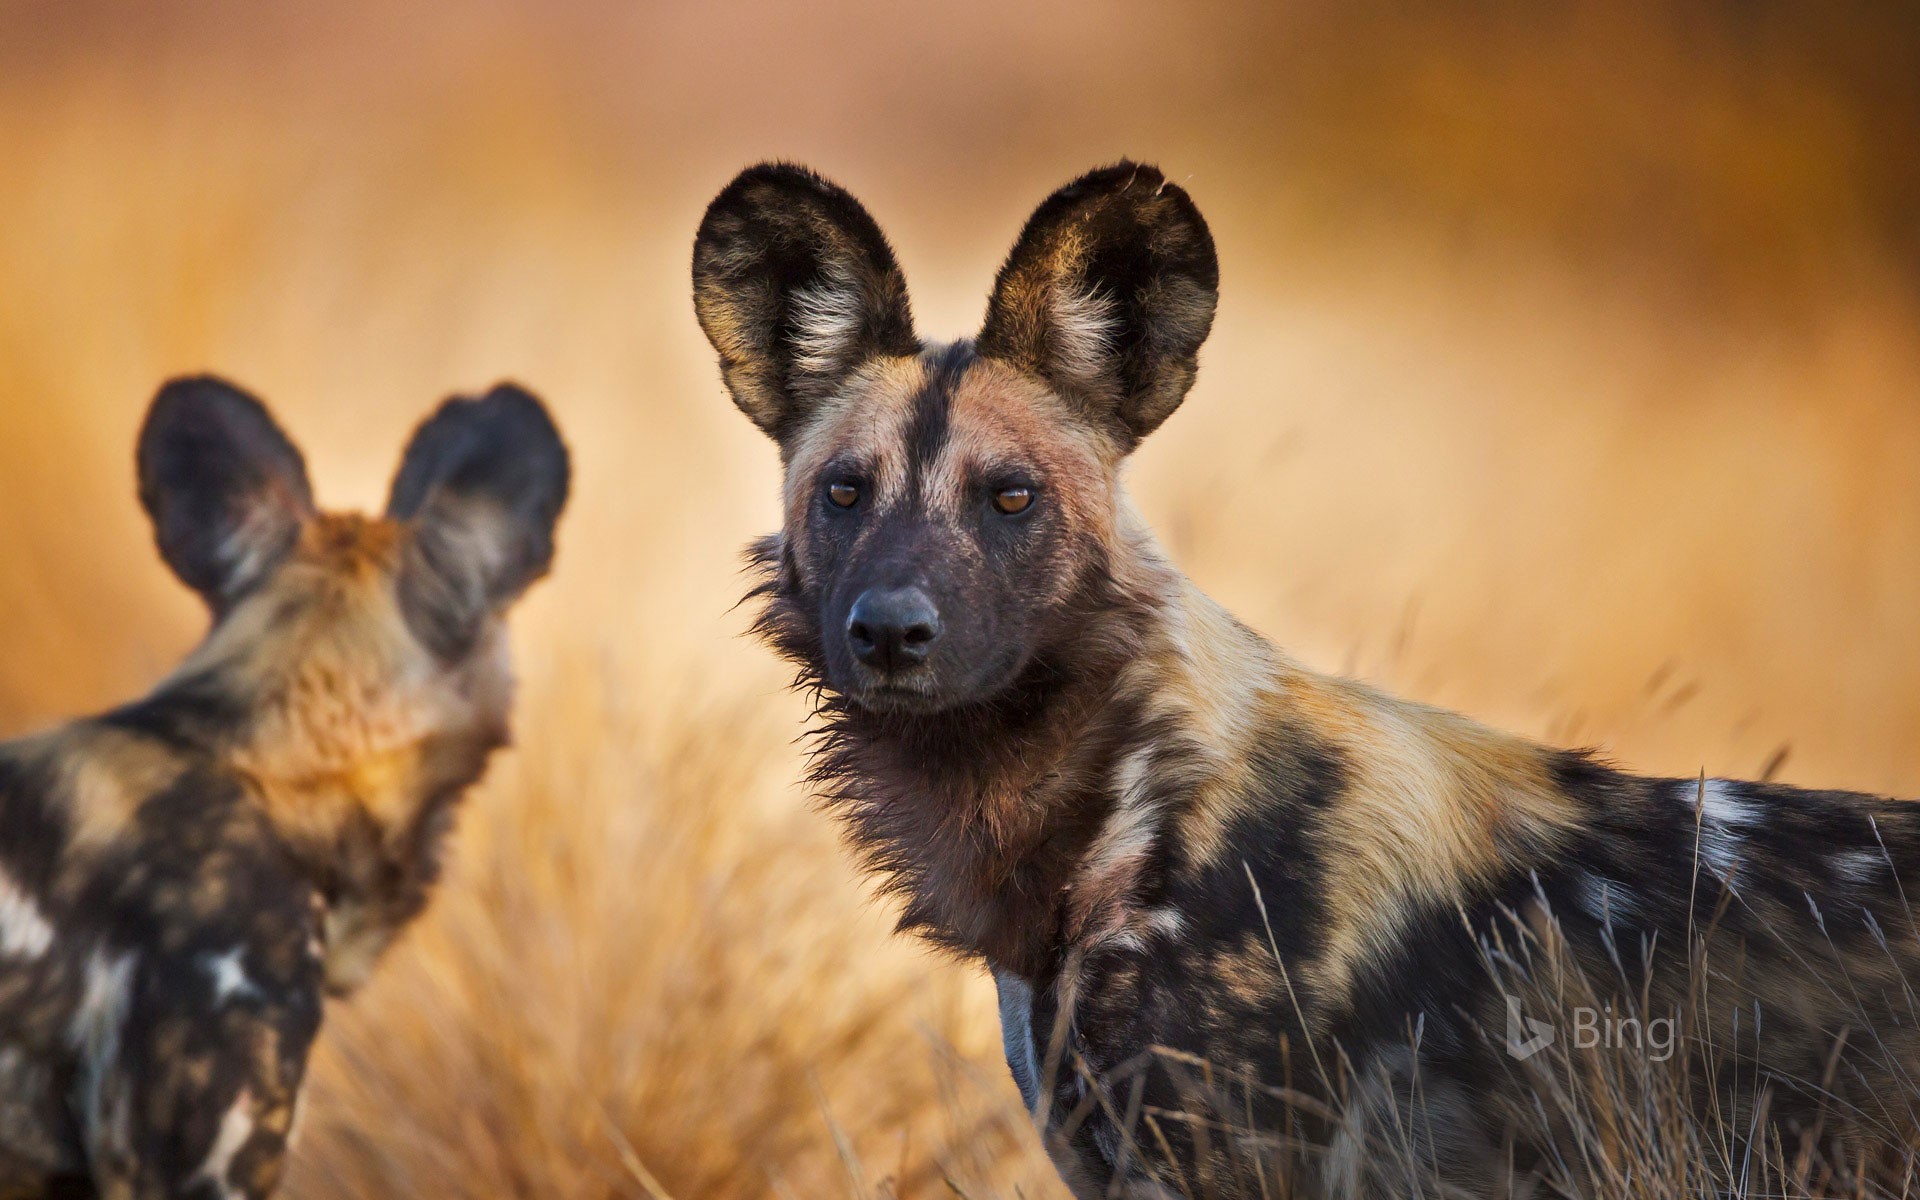 African wild dogs in Kruger National Park, South Africa